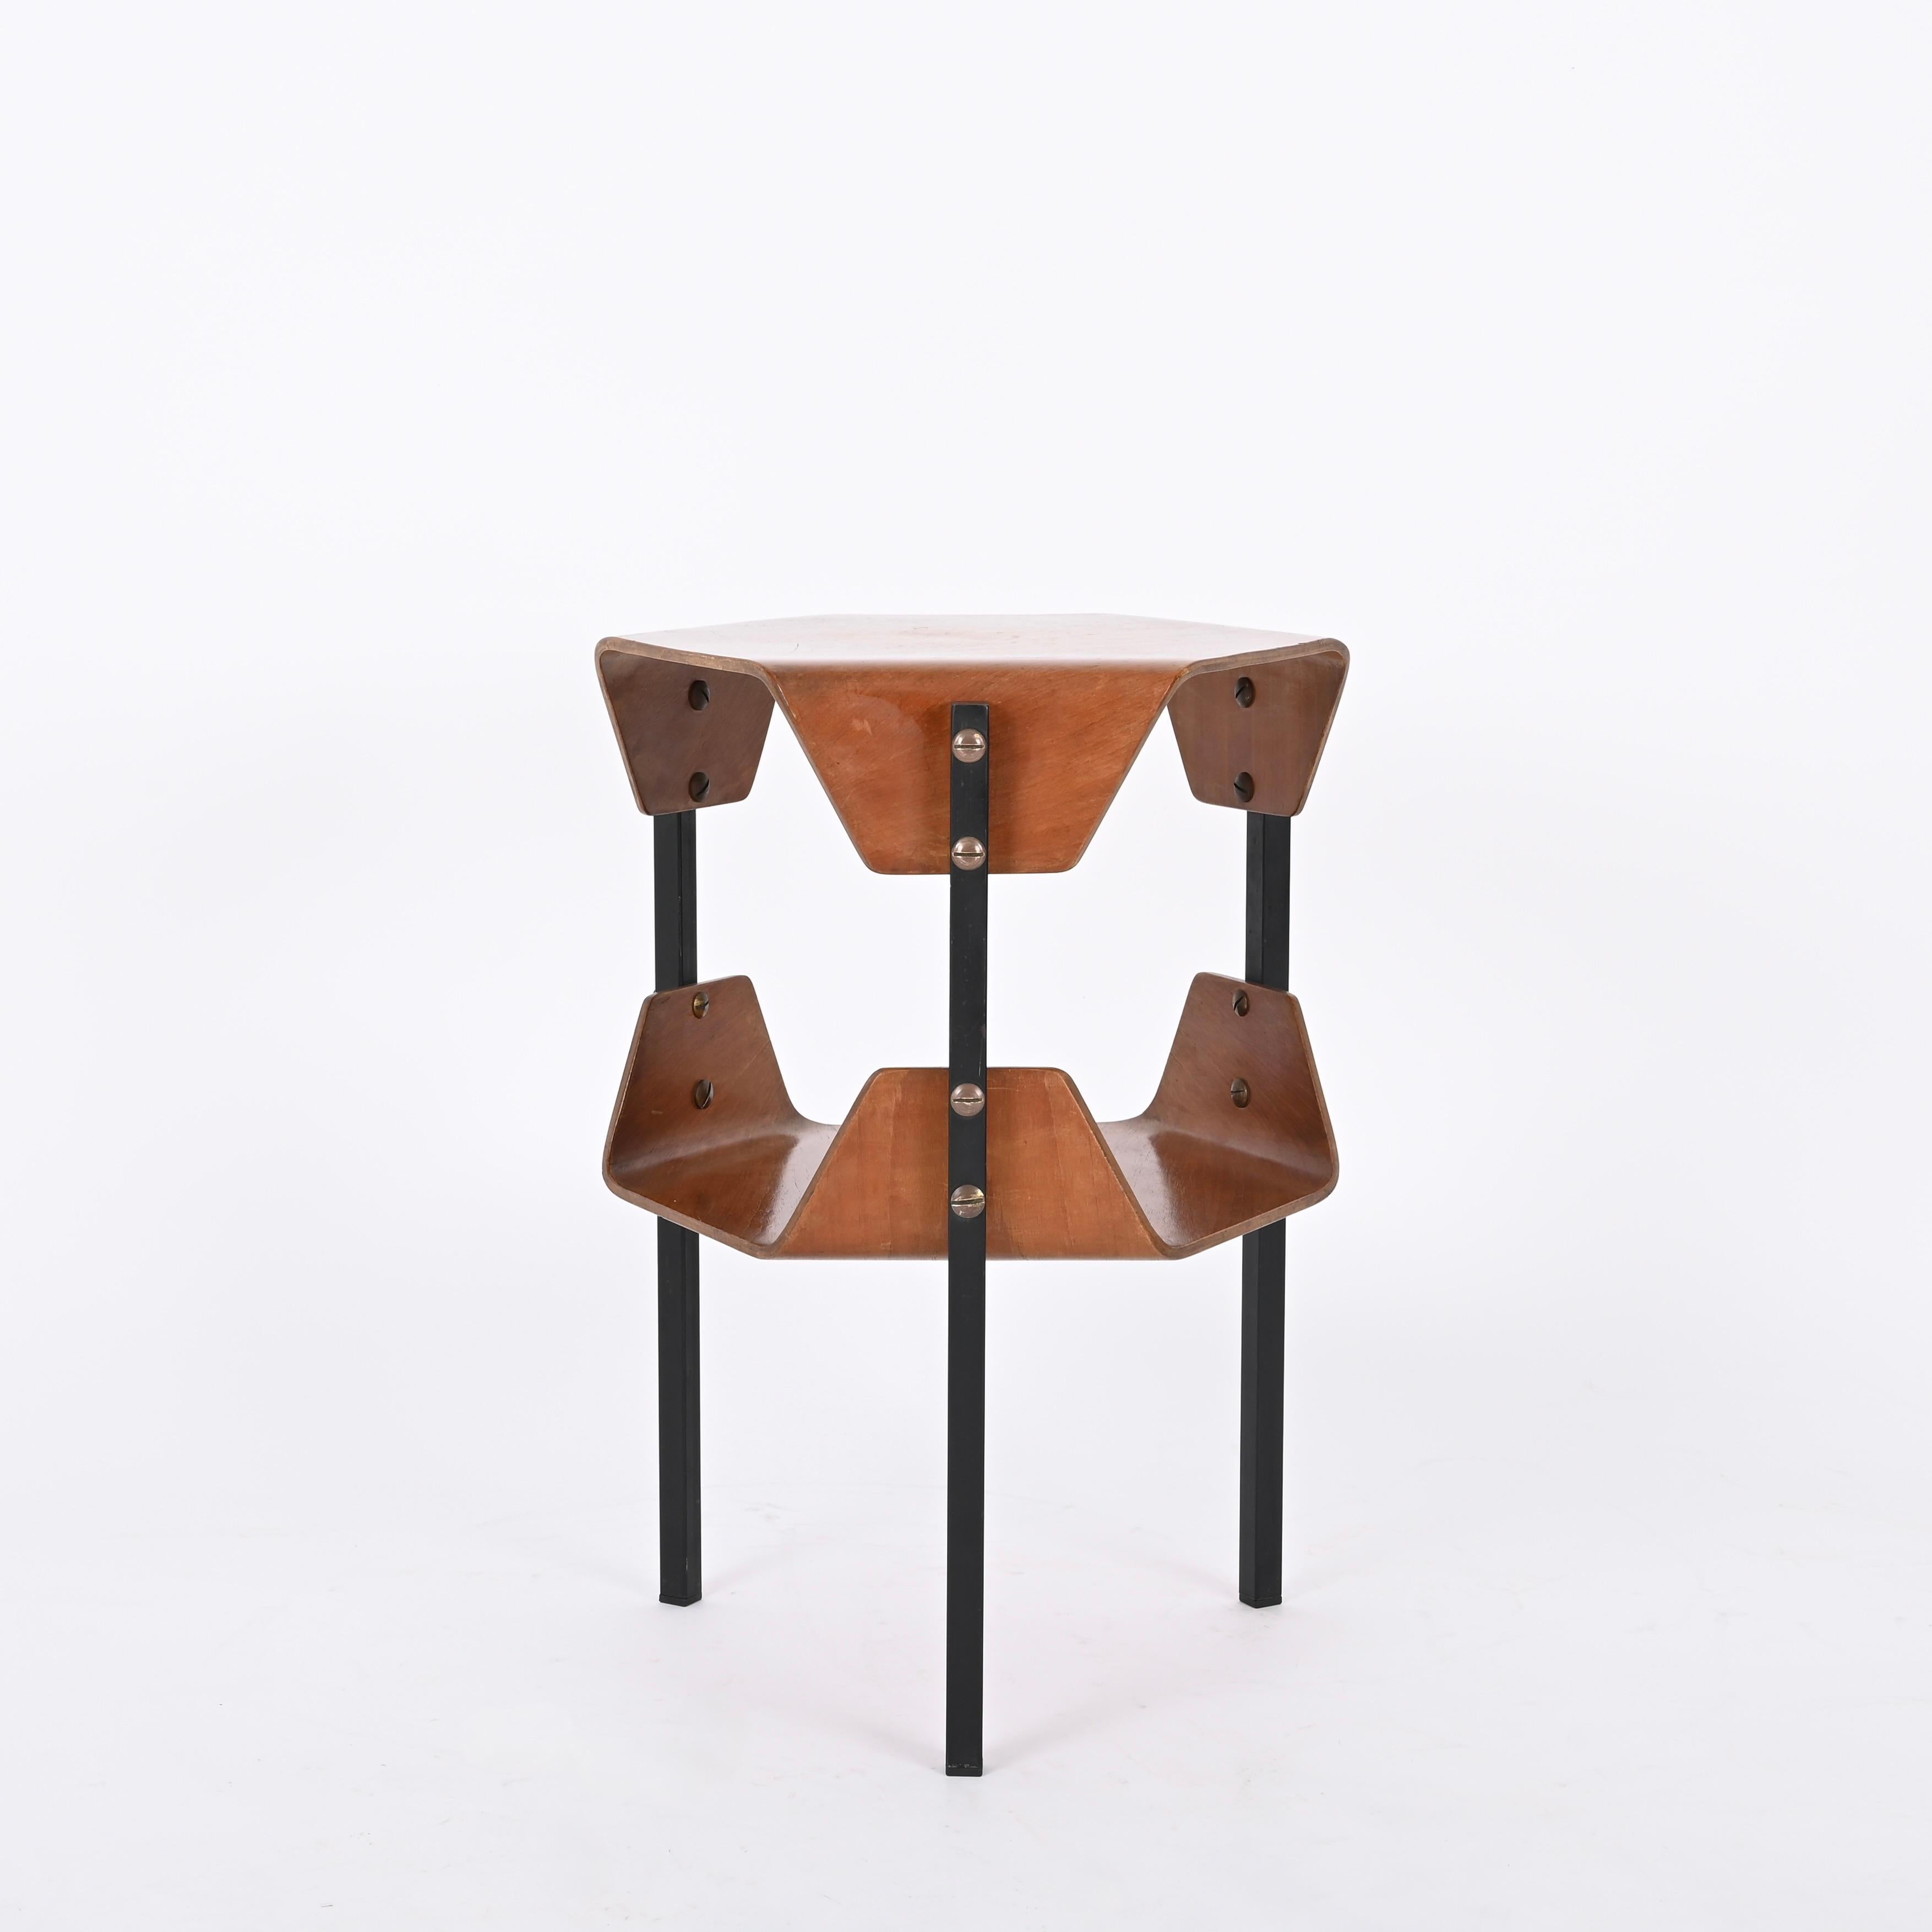 Magnificent side table designed by Campo e Graffi and produced in Italy during the late 1950s. 

This charming two-tier side table is unique thanks to the stunning tops in bent walnut that are connected to three legs in black enameled metal by a